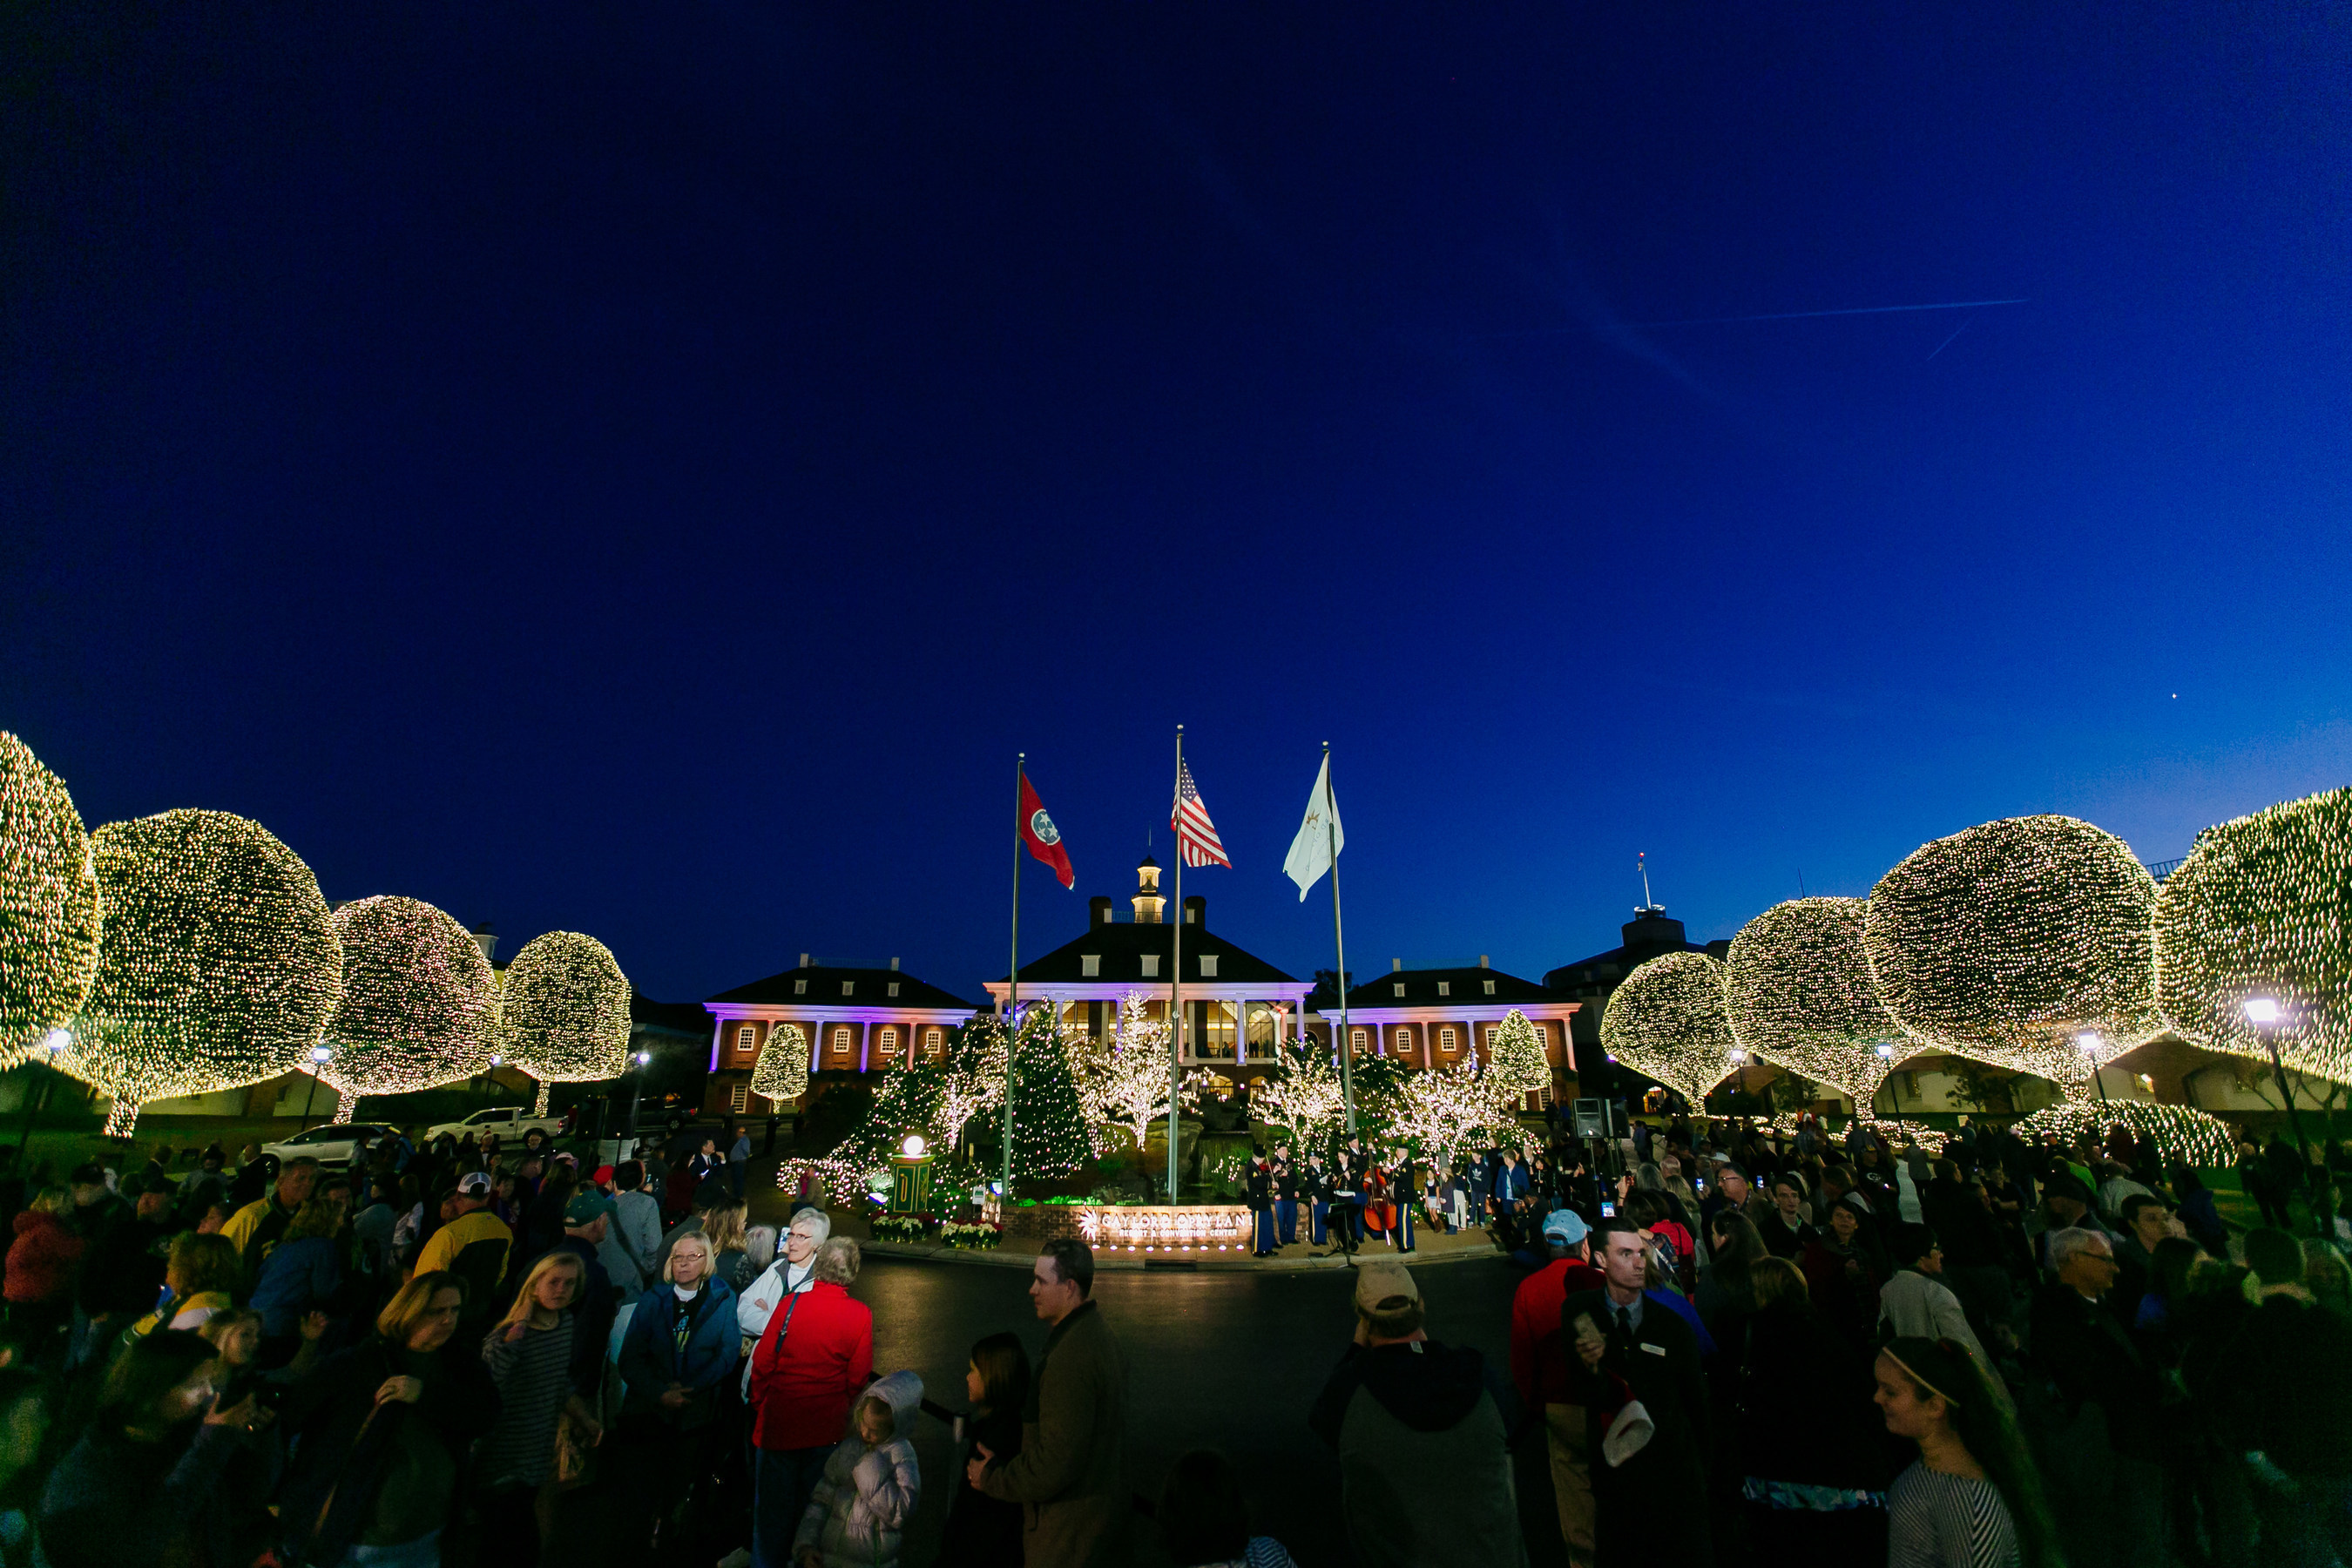 Gaylord Opryland Resort turns on 2.3 million holiday lights, ushering in its annual A Country Christmas celebration.